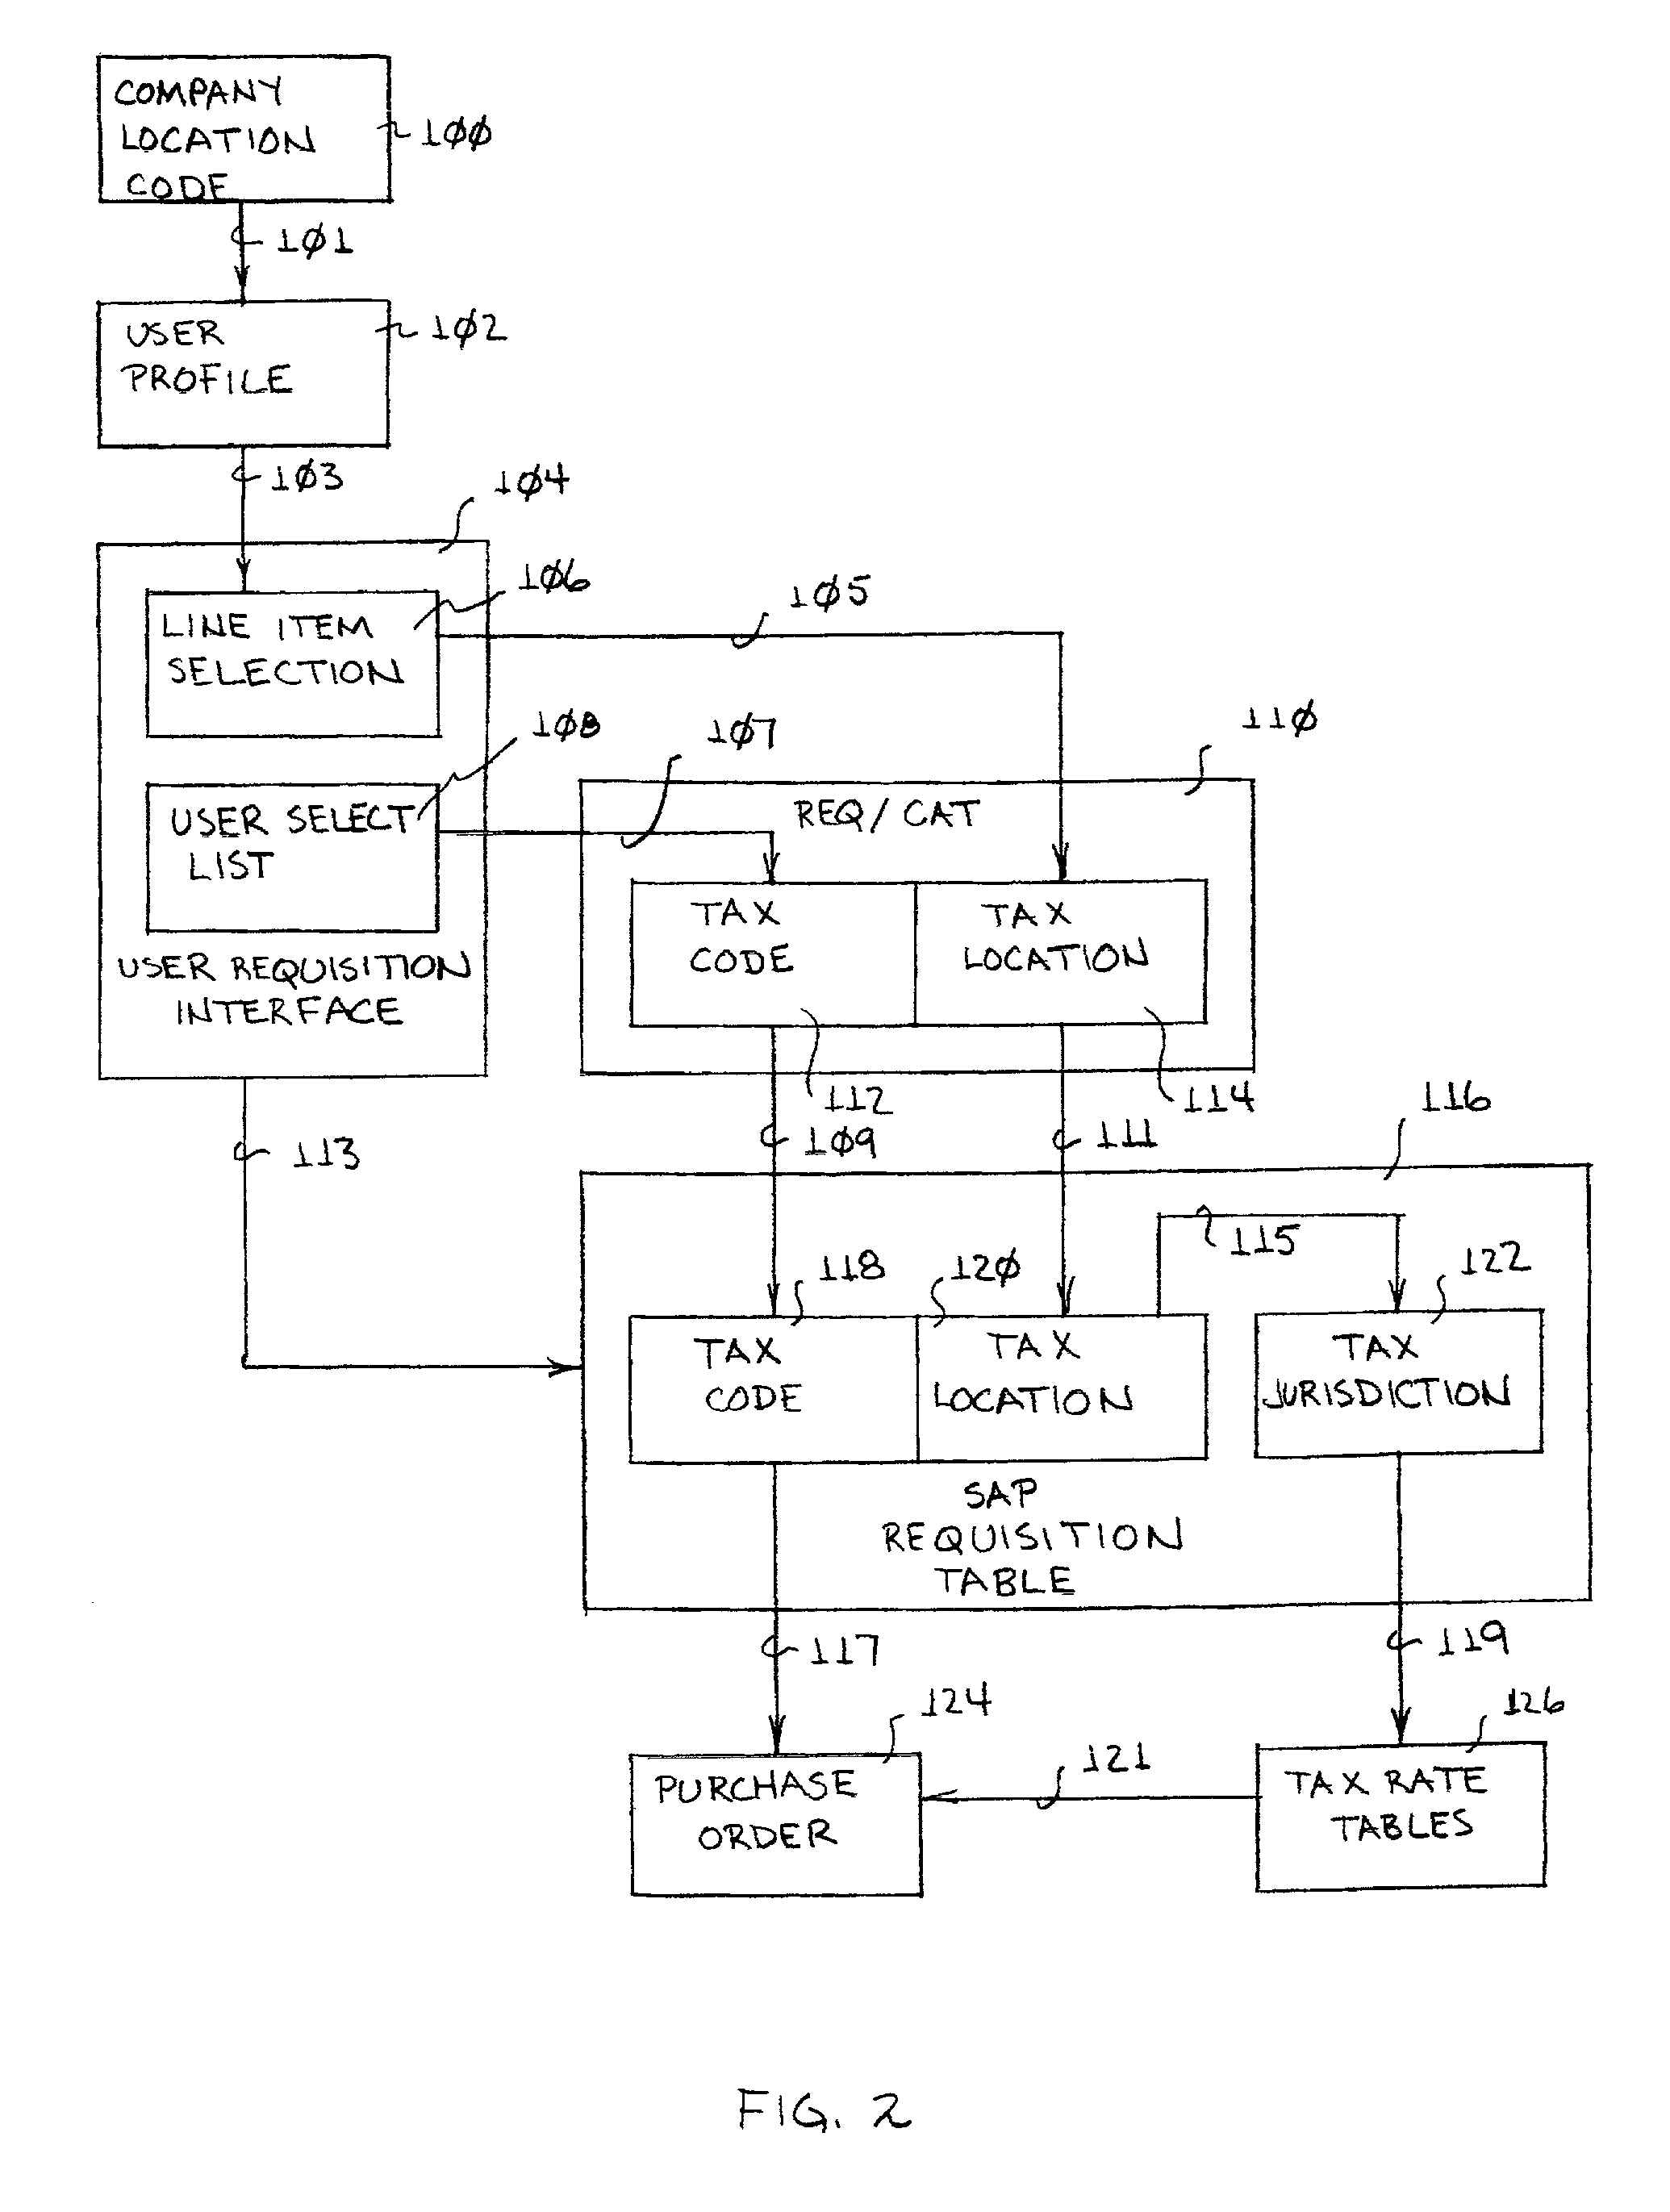 System and method for processing tax codes by company group